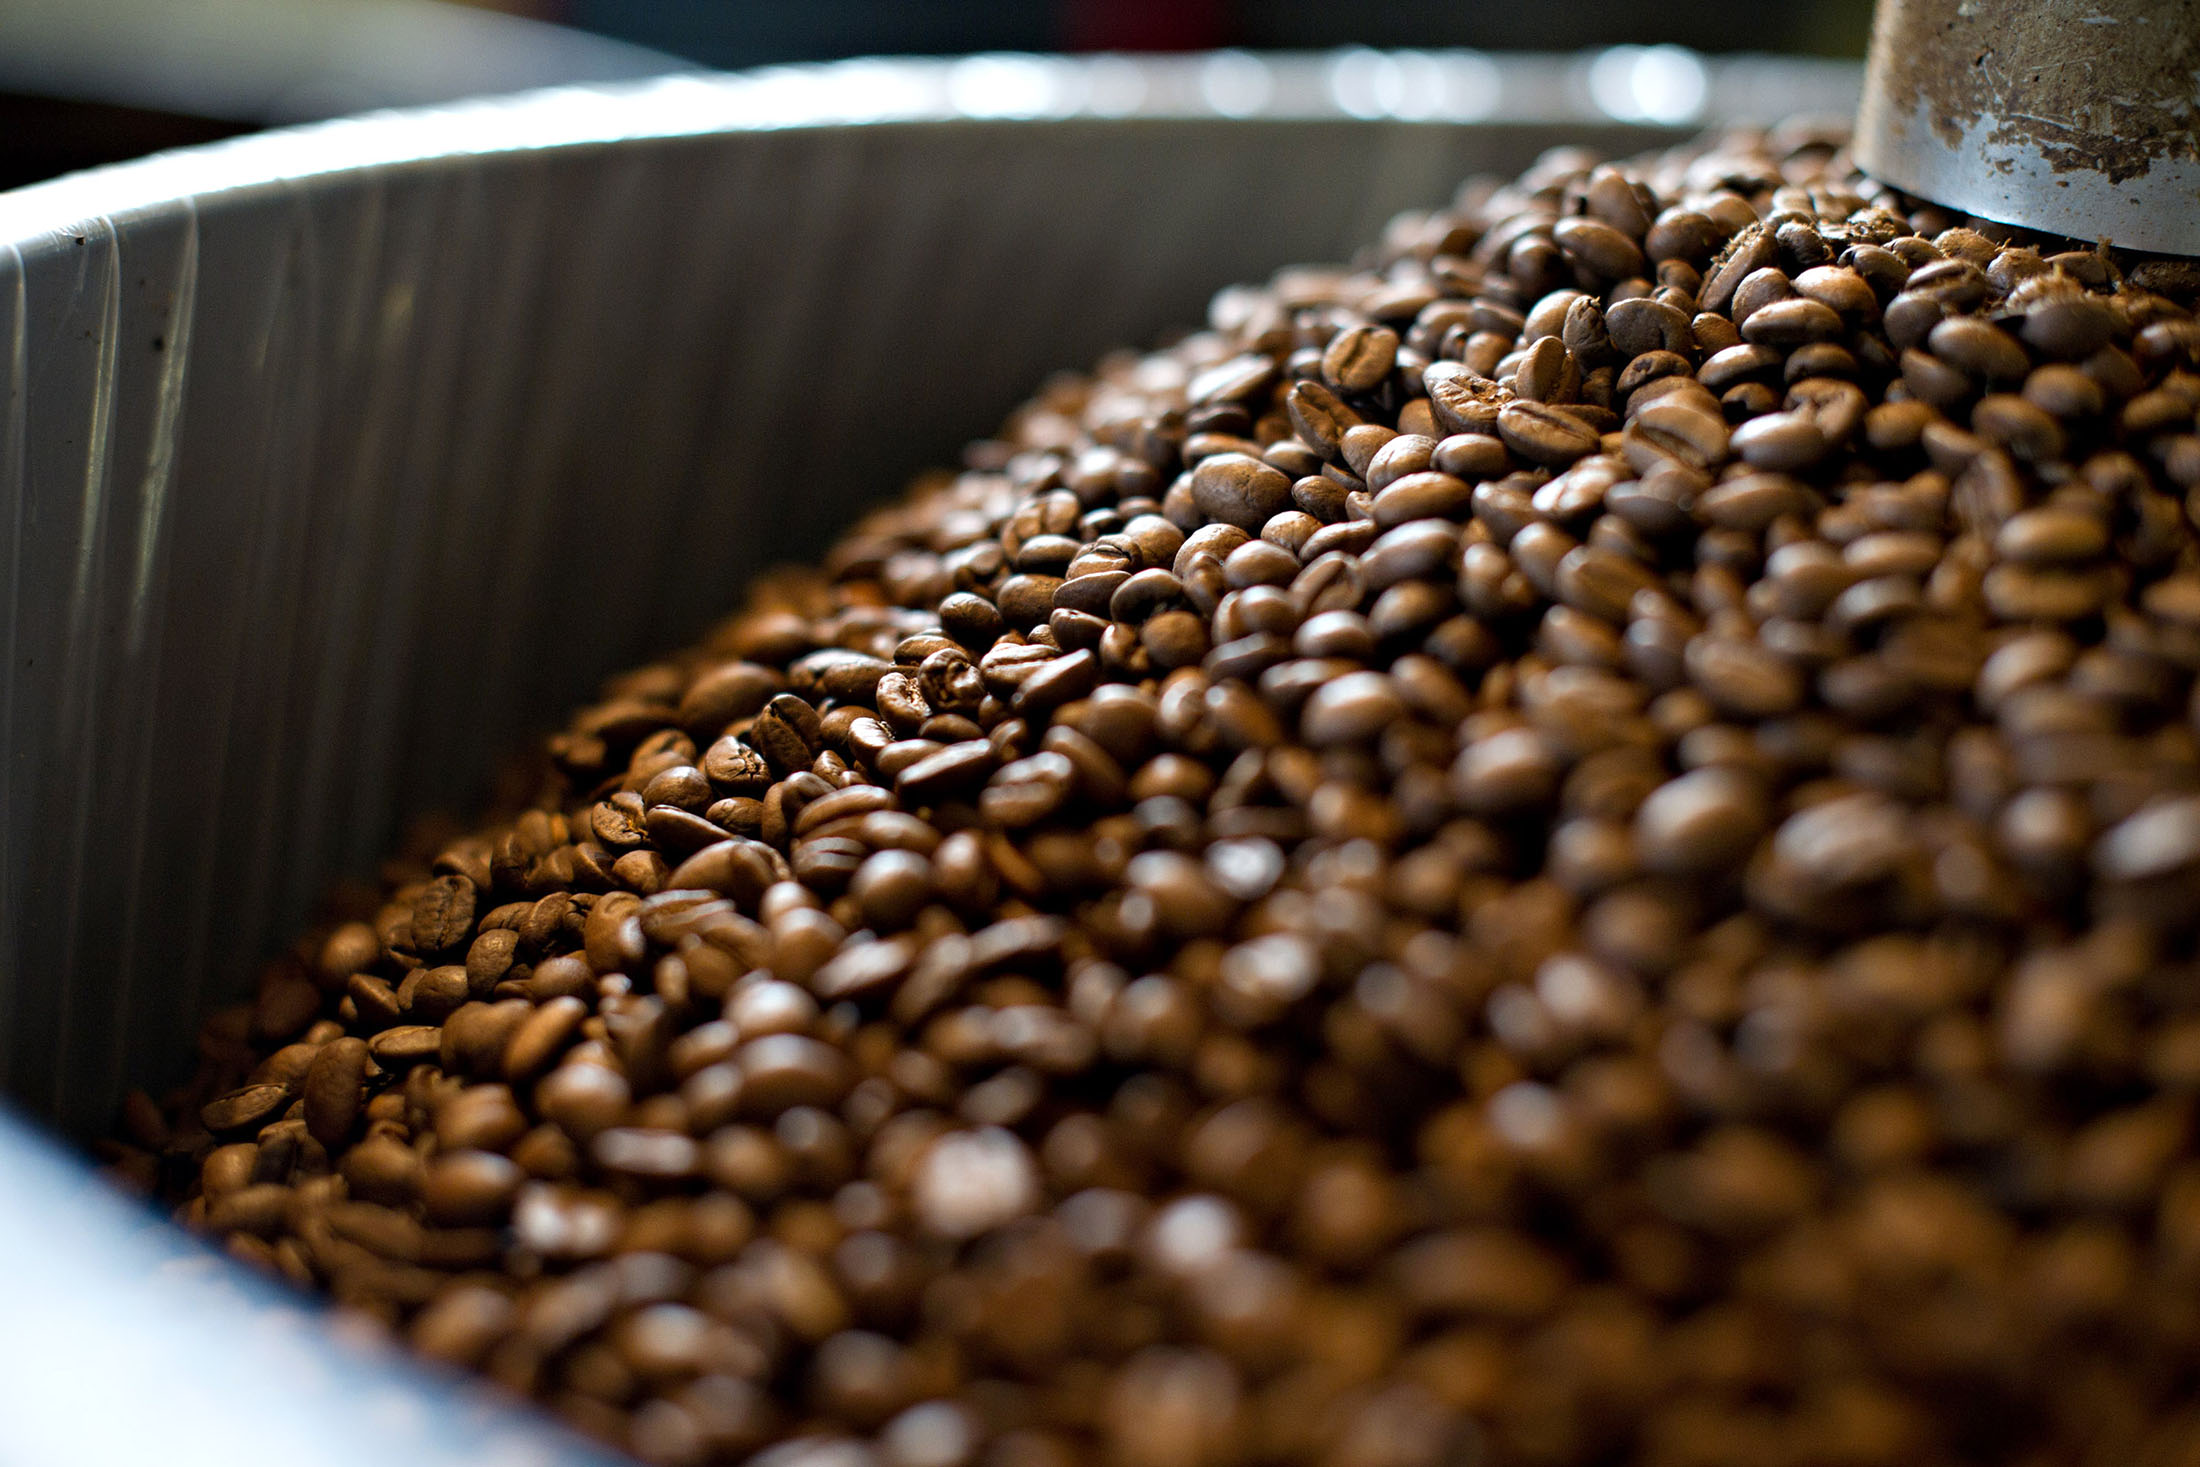 Coffee beans are cooled after roasting at Intelligentsia Coffee & Tea Inc. in Chicago, Illinois, U.S., on Friday, June 10, 2011. Prices for washed arabica coffee from Ethiopia rose by as much as 9.9 percent last week in trading on the Ethiopia Commodity Exchange.